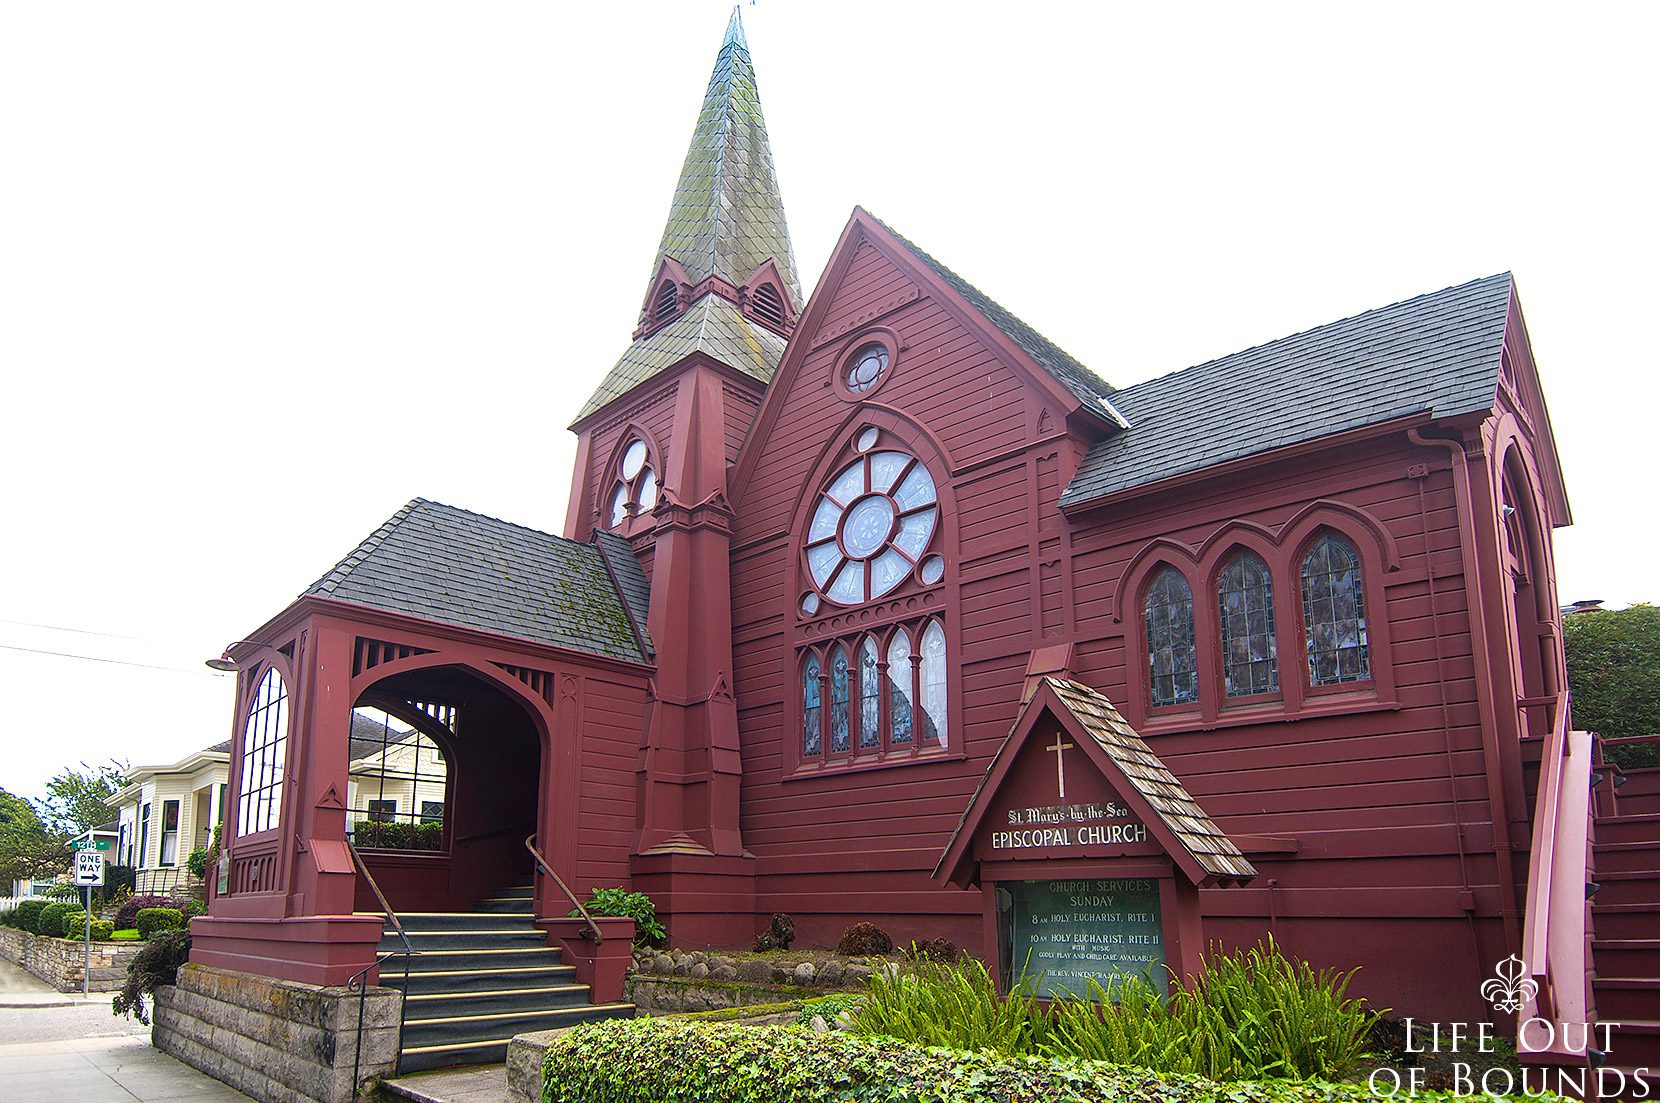 St-Marys-by-the-Sea-Episcopal-Church-in-Pacific-Grove-California